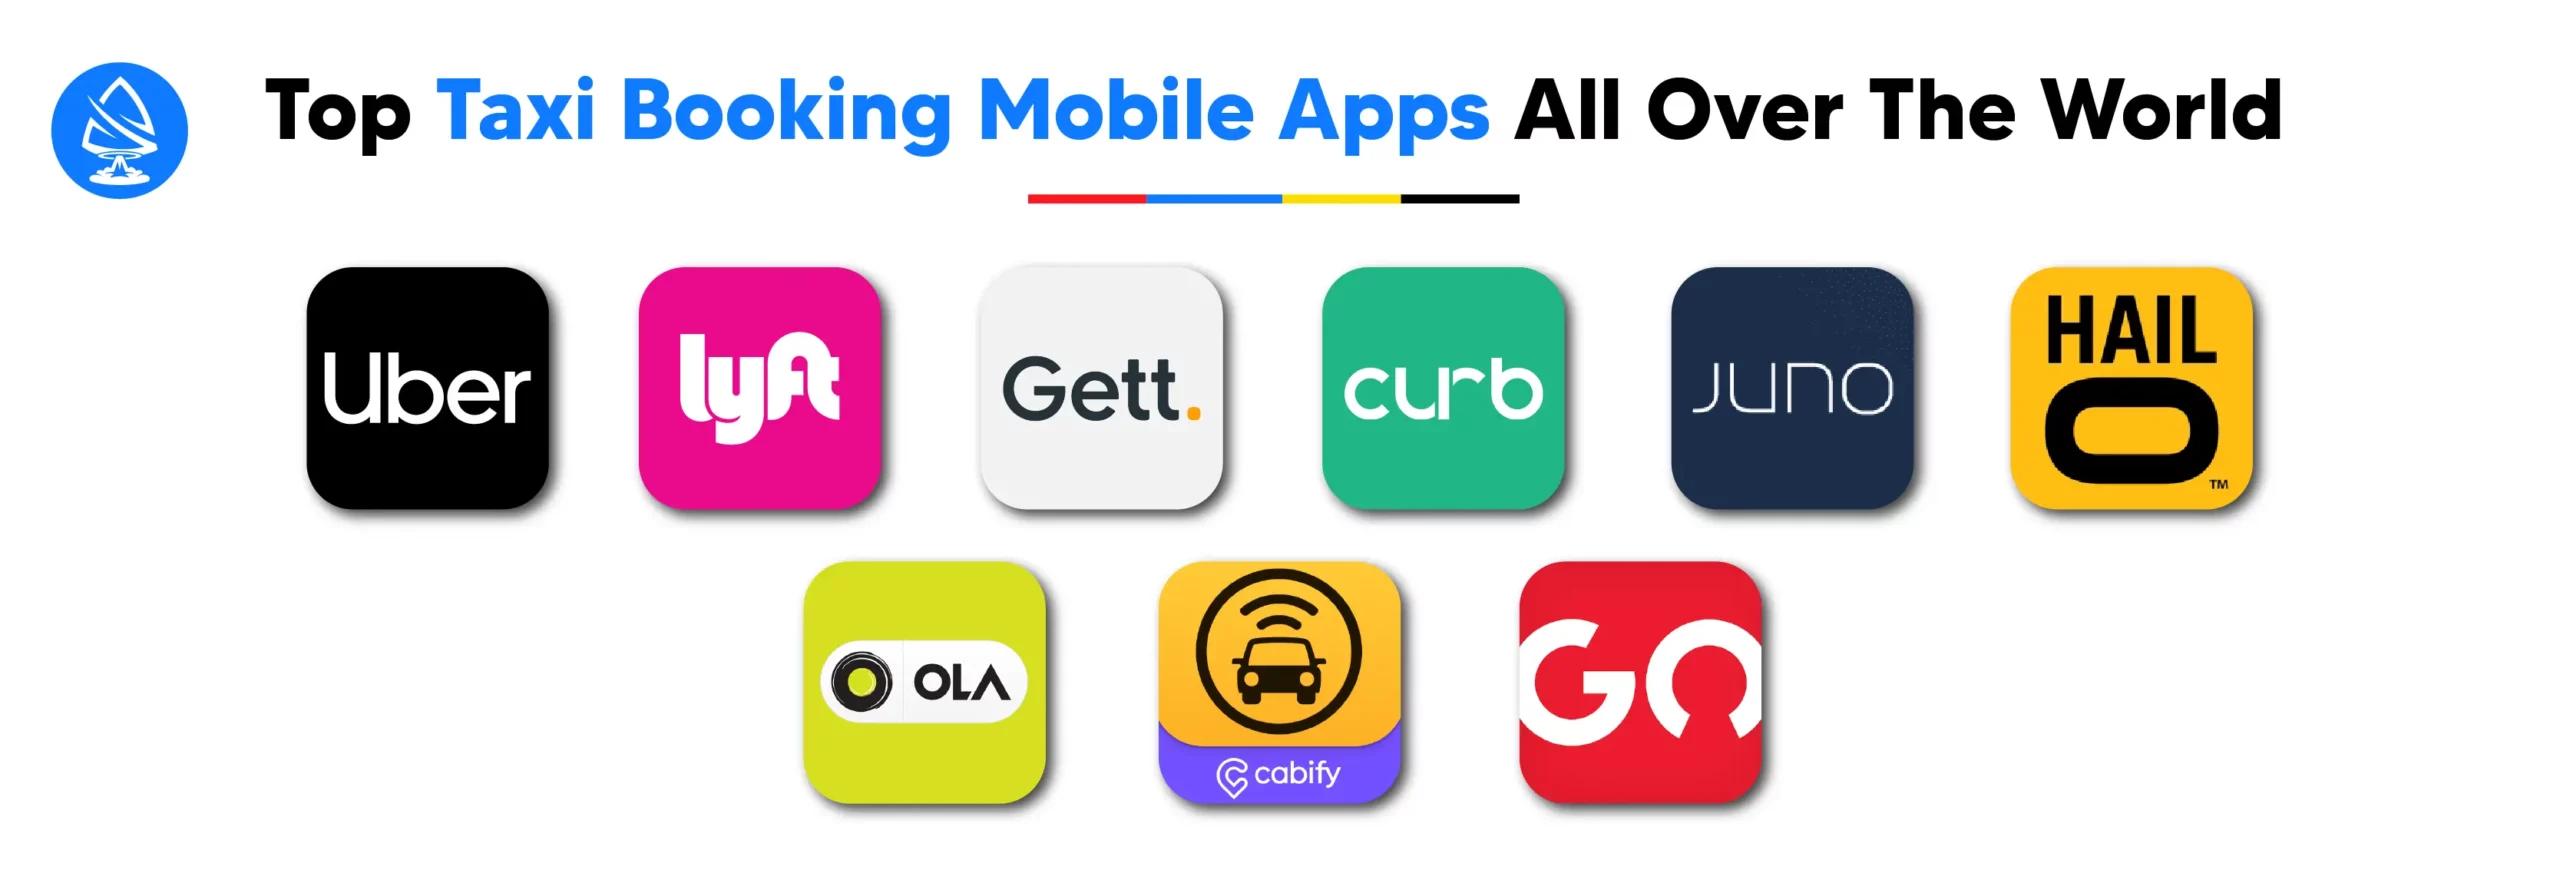 Top Taxi Booking Mobile Apps All Over The World